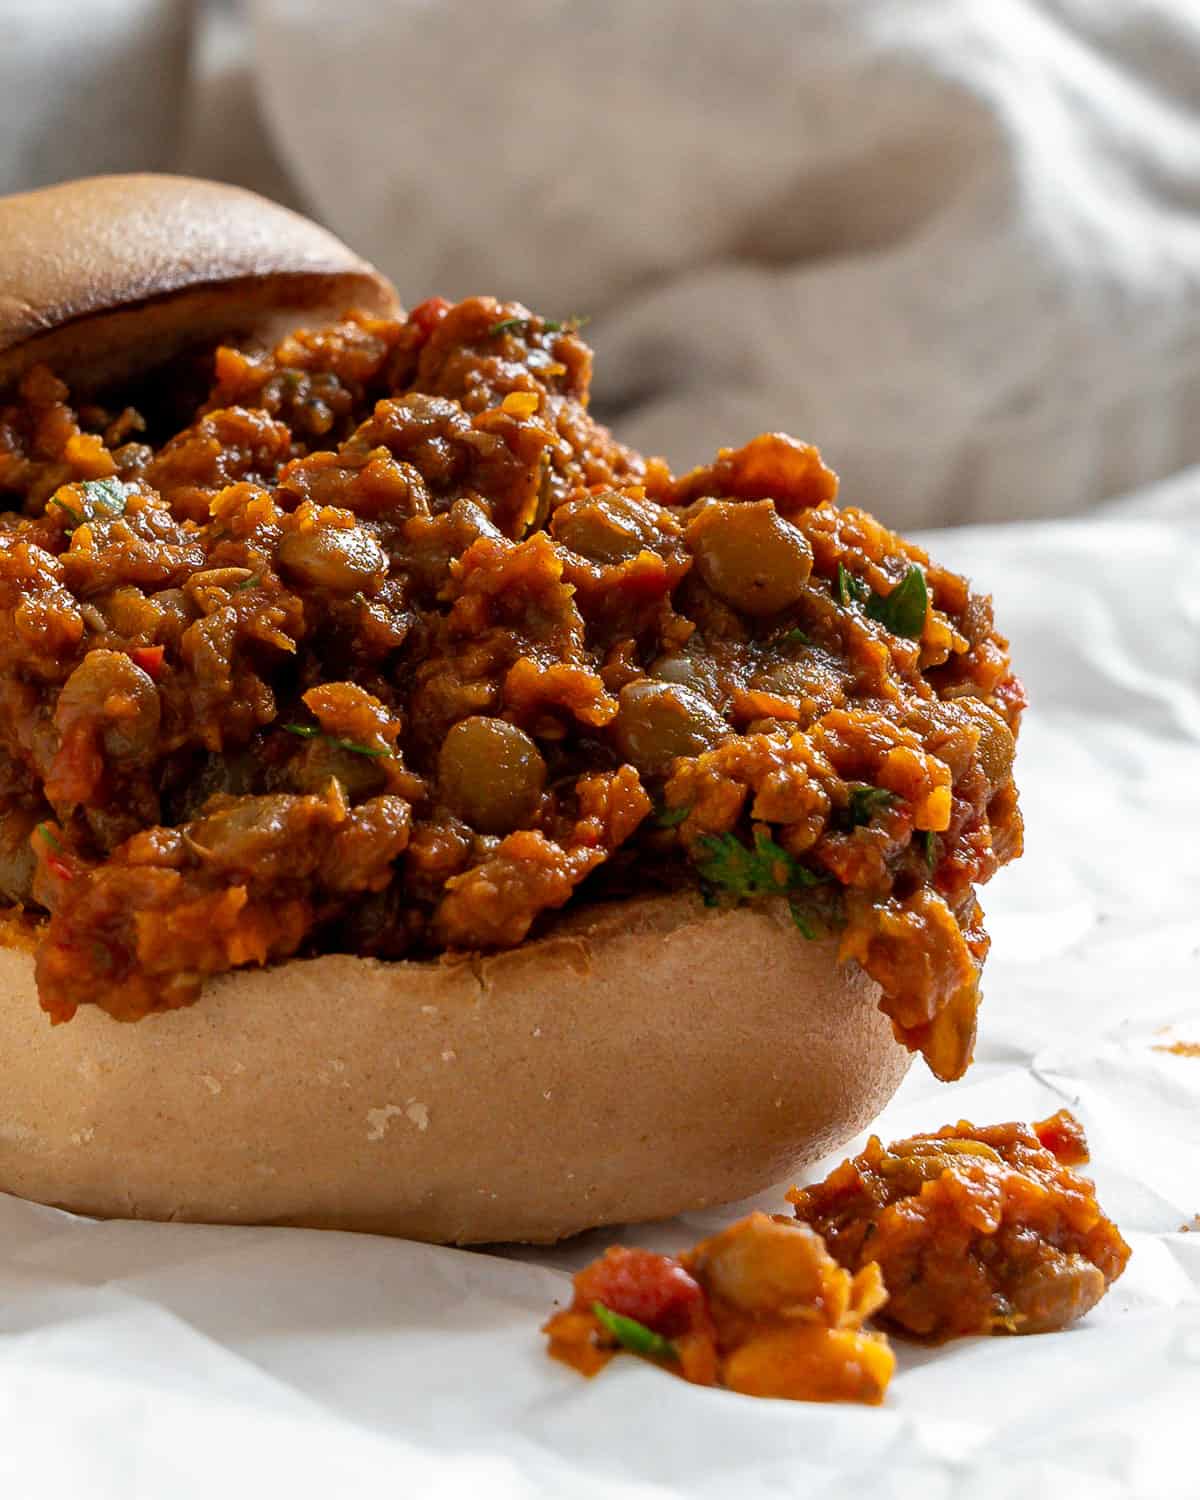 completed Lentil Sloppy Joes (Stove or Slow Cooker) in a hamburger bun